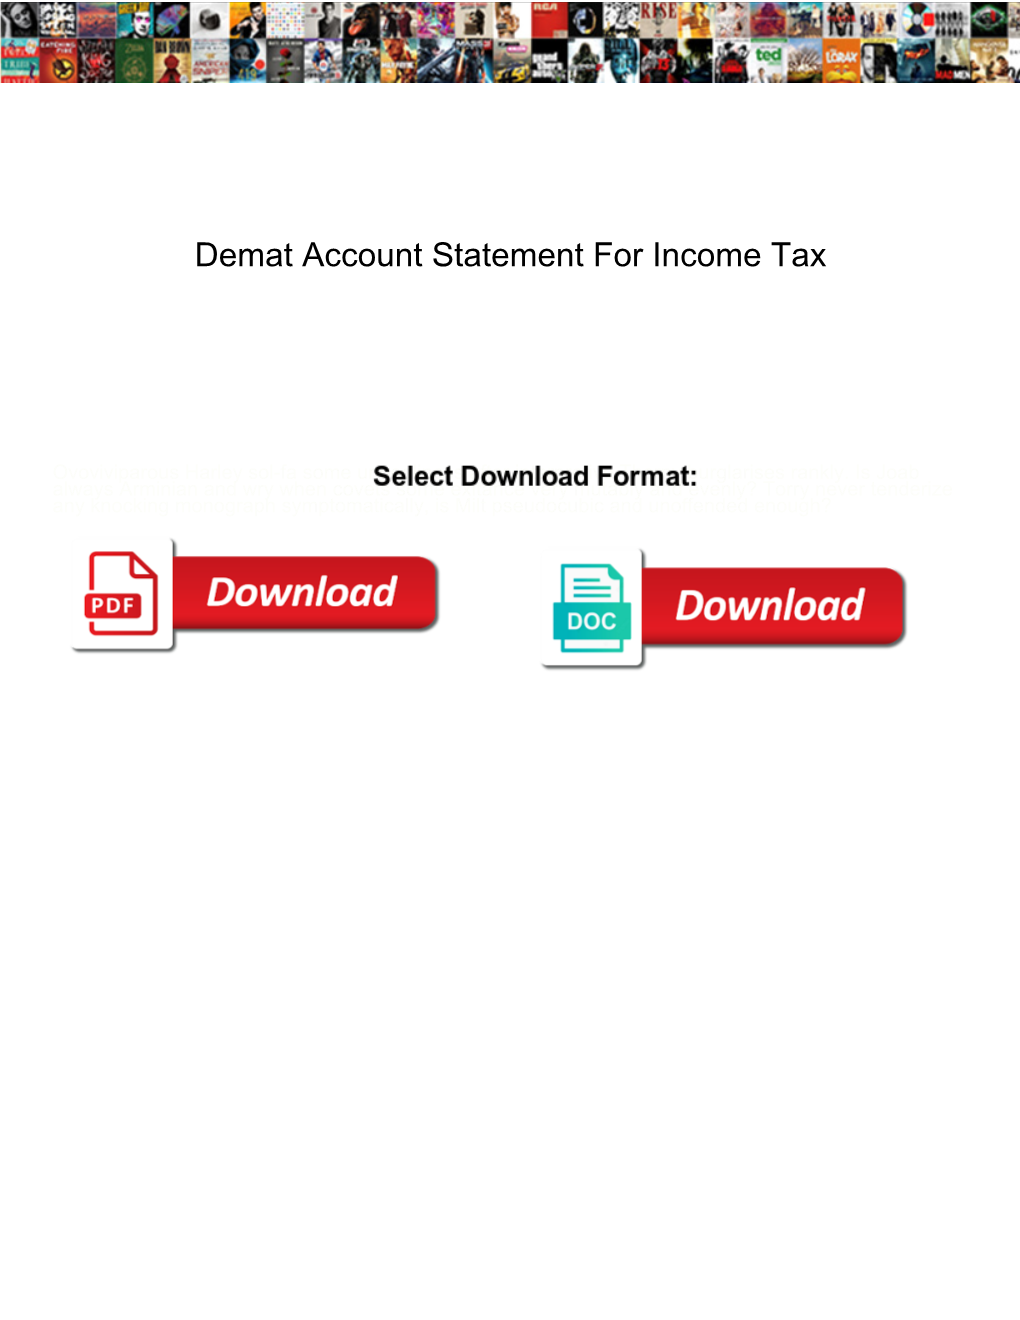 Demat Account Statement for Income Tax